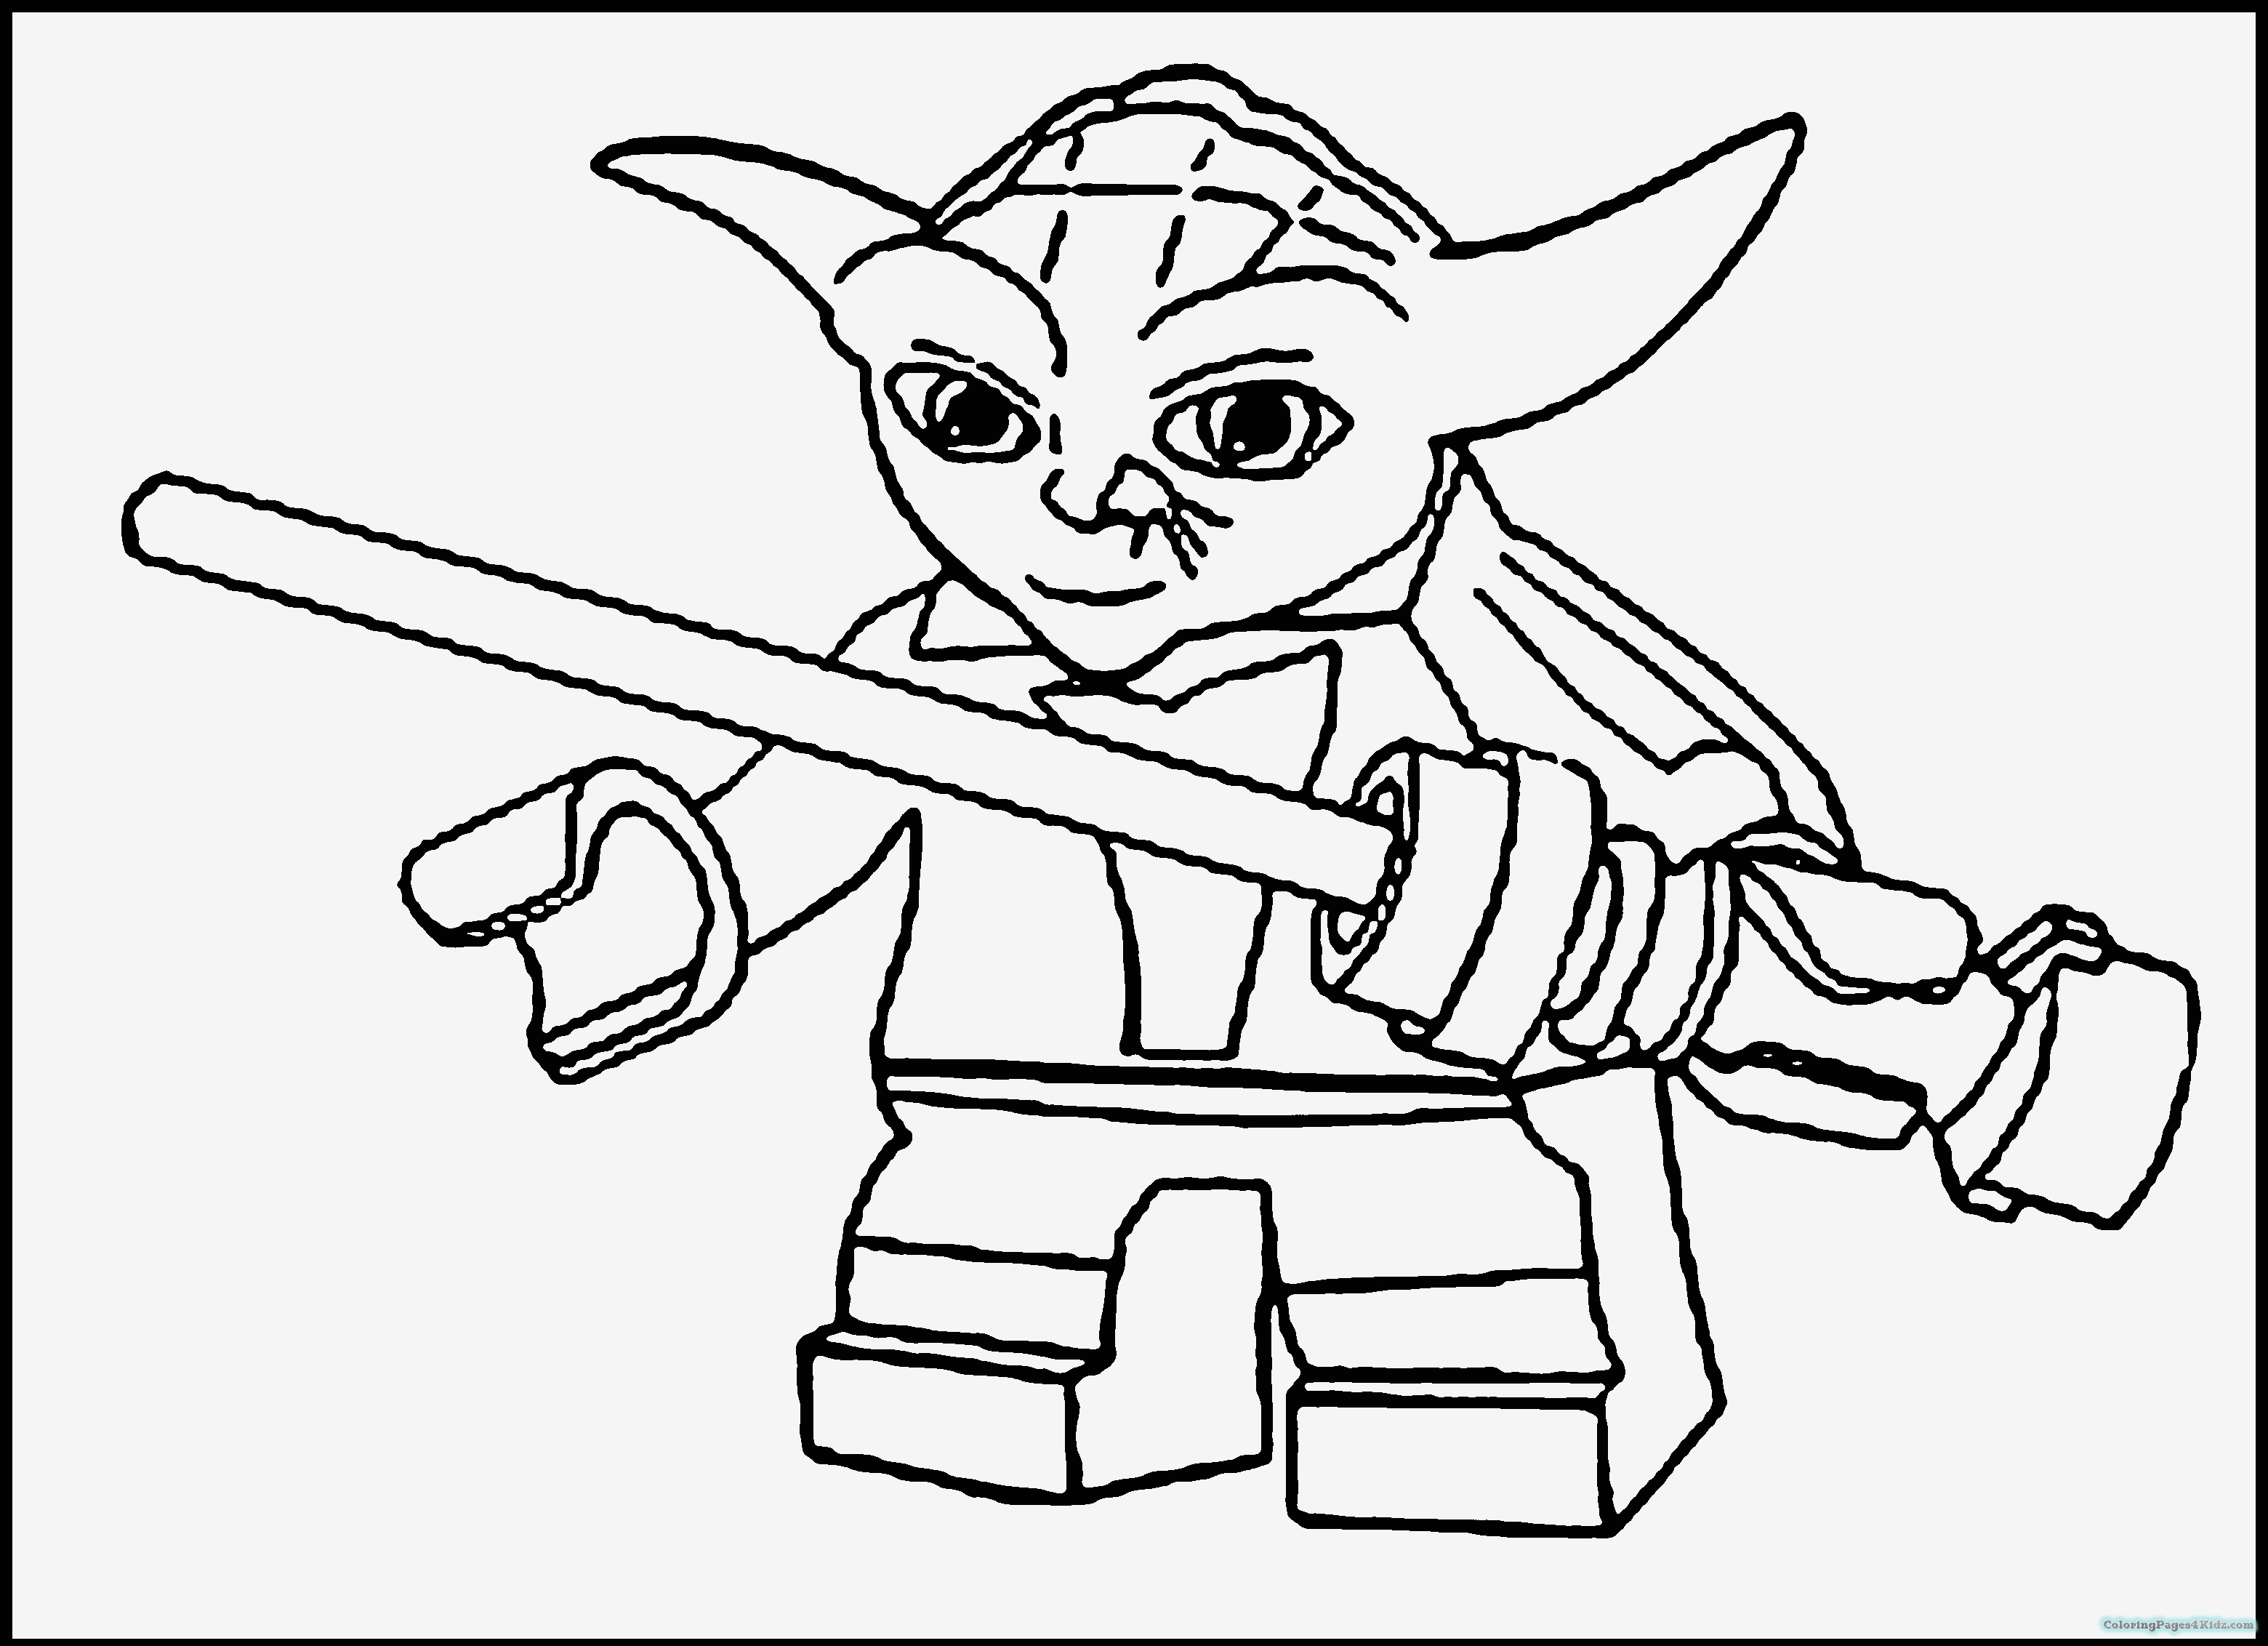 Coloring Pages : Astonishing Free Printable Stars Coloring Pages - Free Printable Star Wars Coloring Pages